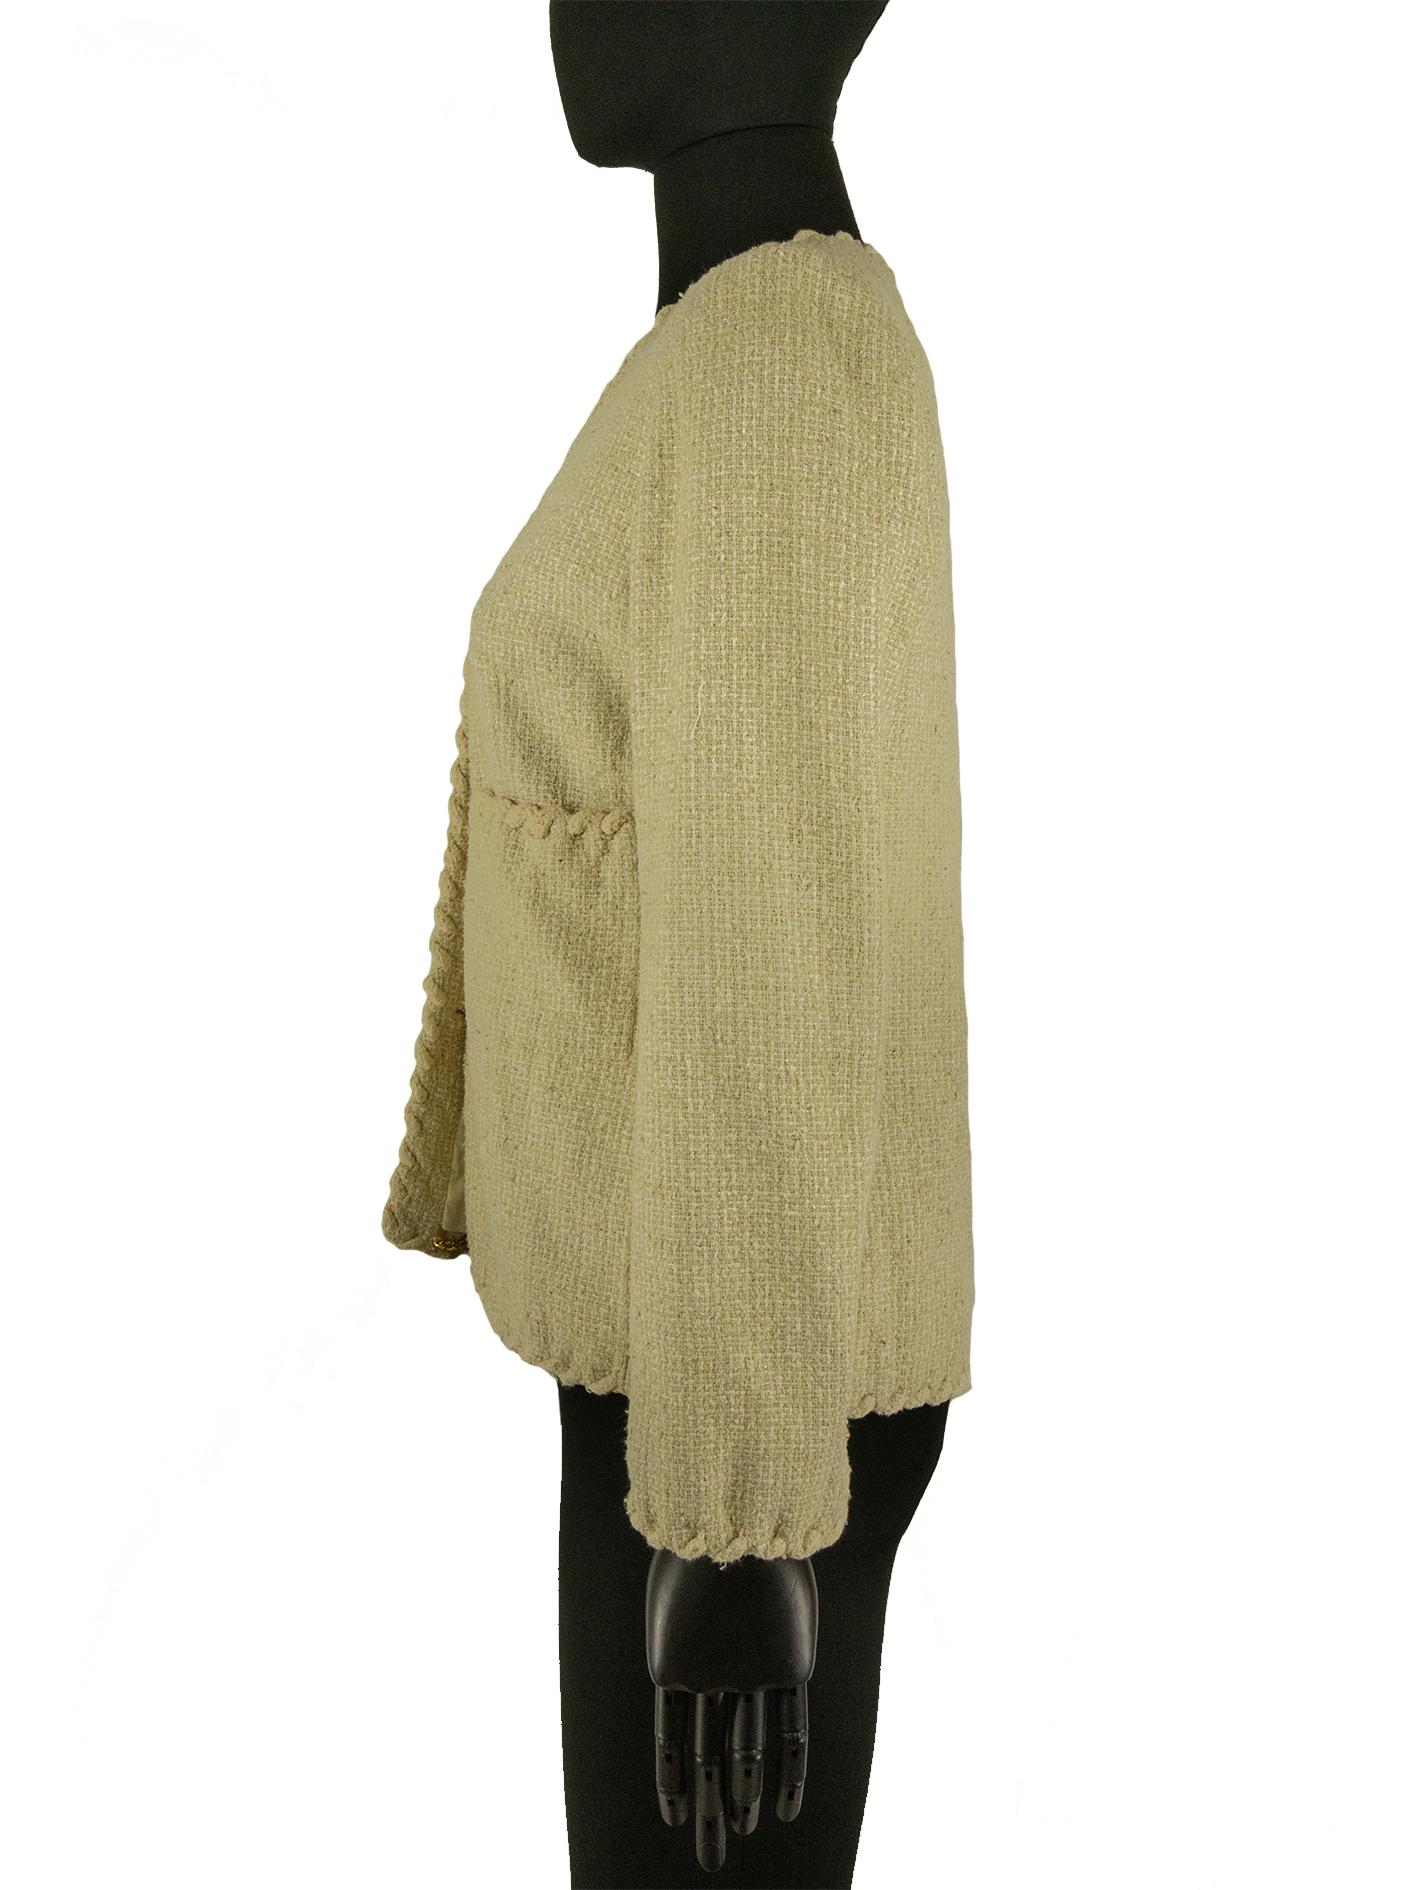 A 1970s Chanel jacket in cream tweed, with a rope inspired detail along the collar, hems, cuffs and pockets. The centre front is fastened with three buttons with gilt lion details. The bodice holds 4 pockets, two patches and two hidden, and the hem